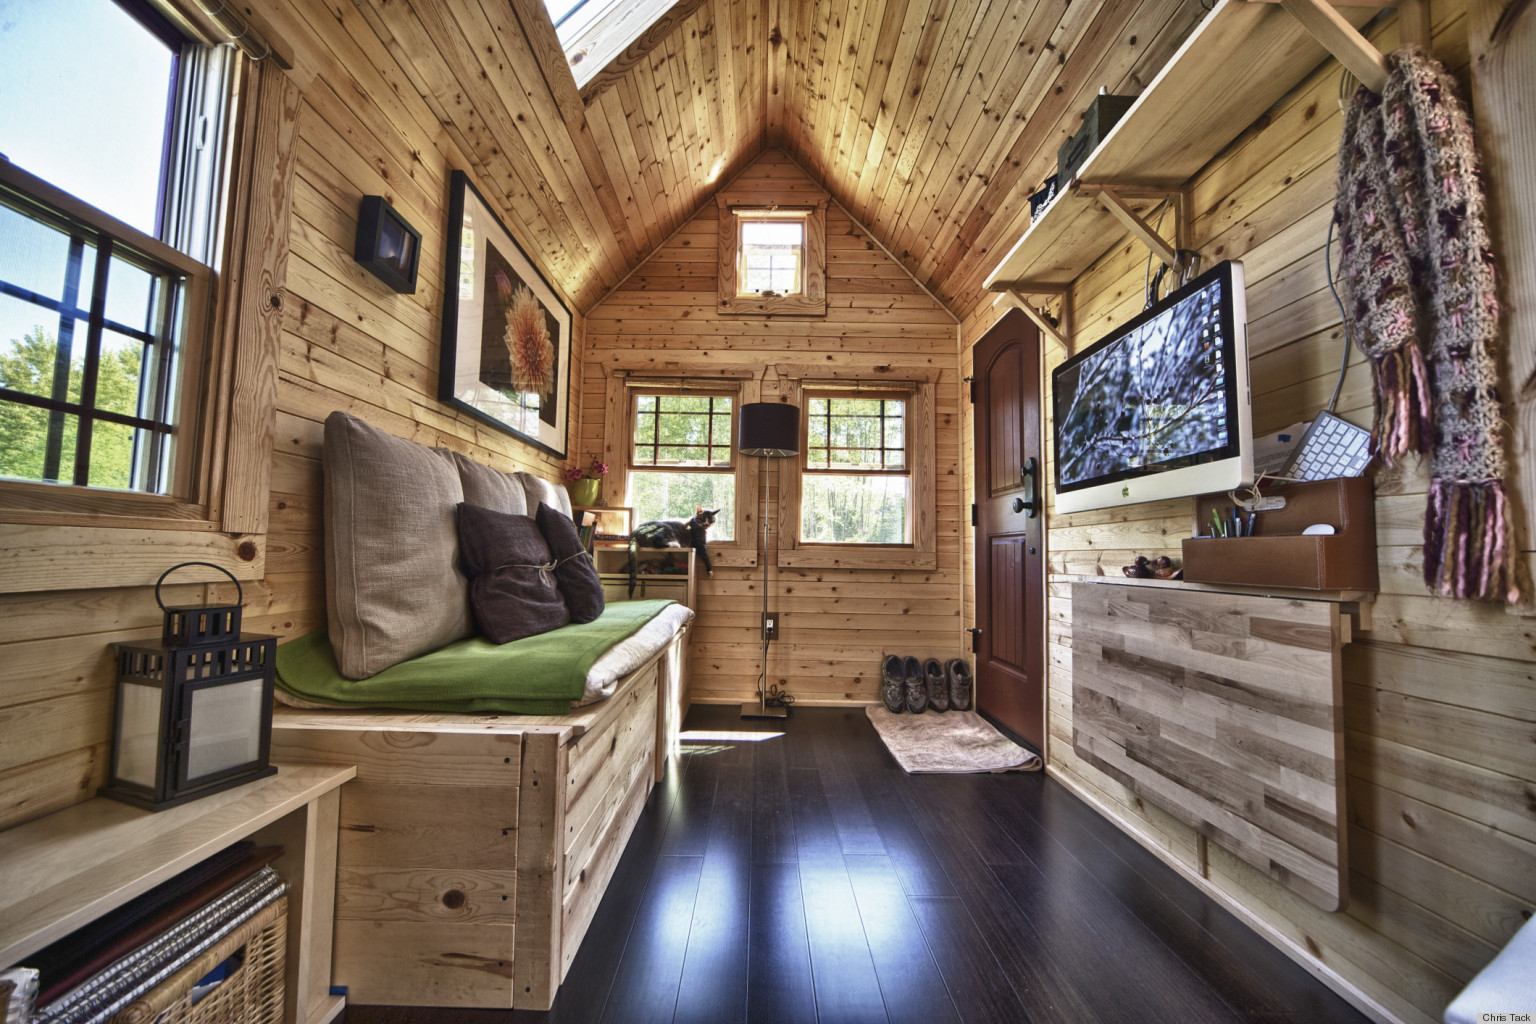 Chris And Malissa Tack&#039;s Tiny Home Transformed This High-Tech Couple